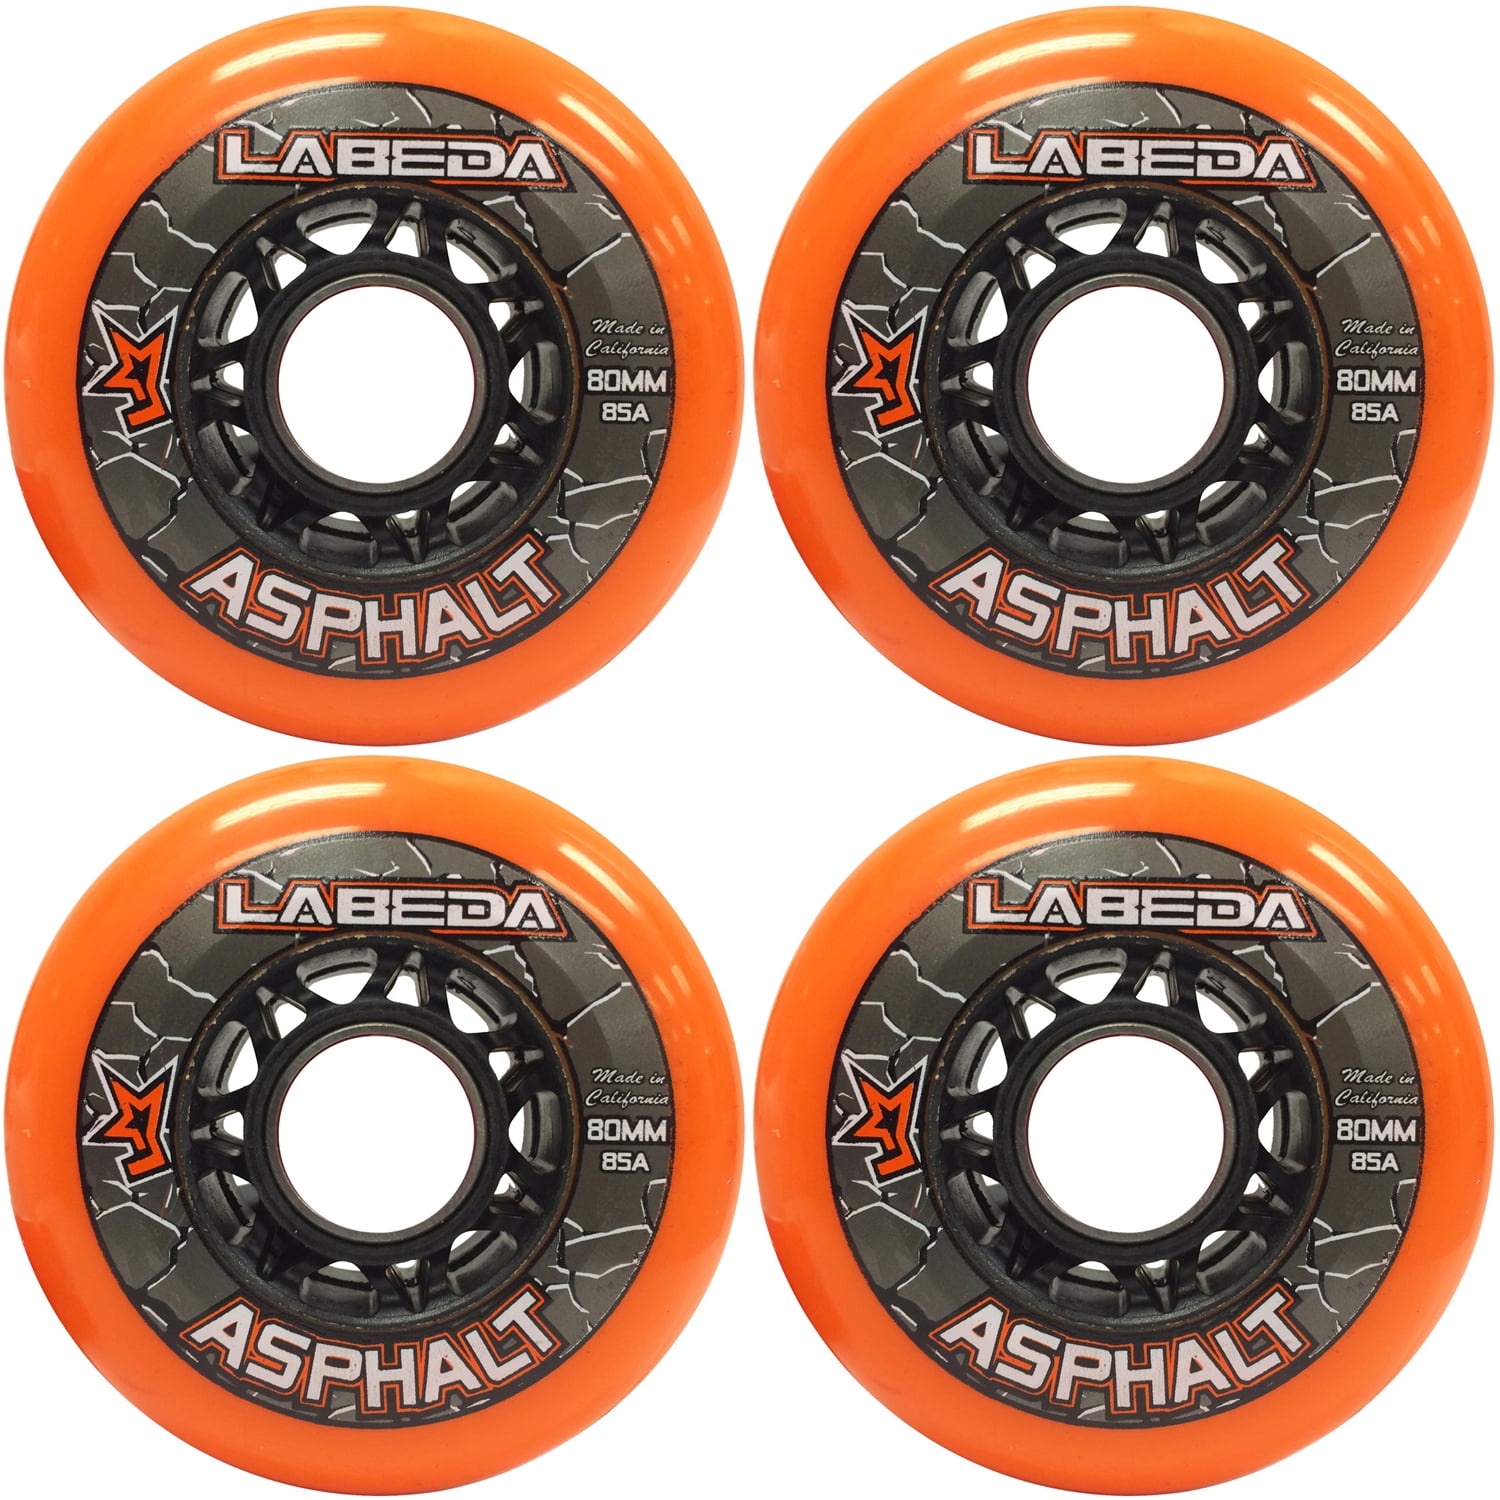 Replacement Skate Wheels 8-Pack Inline Skate Wheels 85A for Asphalt Inline Skating Or Outdoor/Indoor Scooter Hockey with Stories for Girls & Boys 